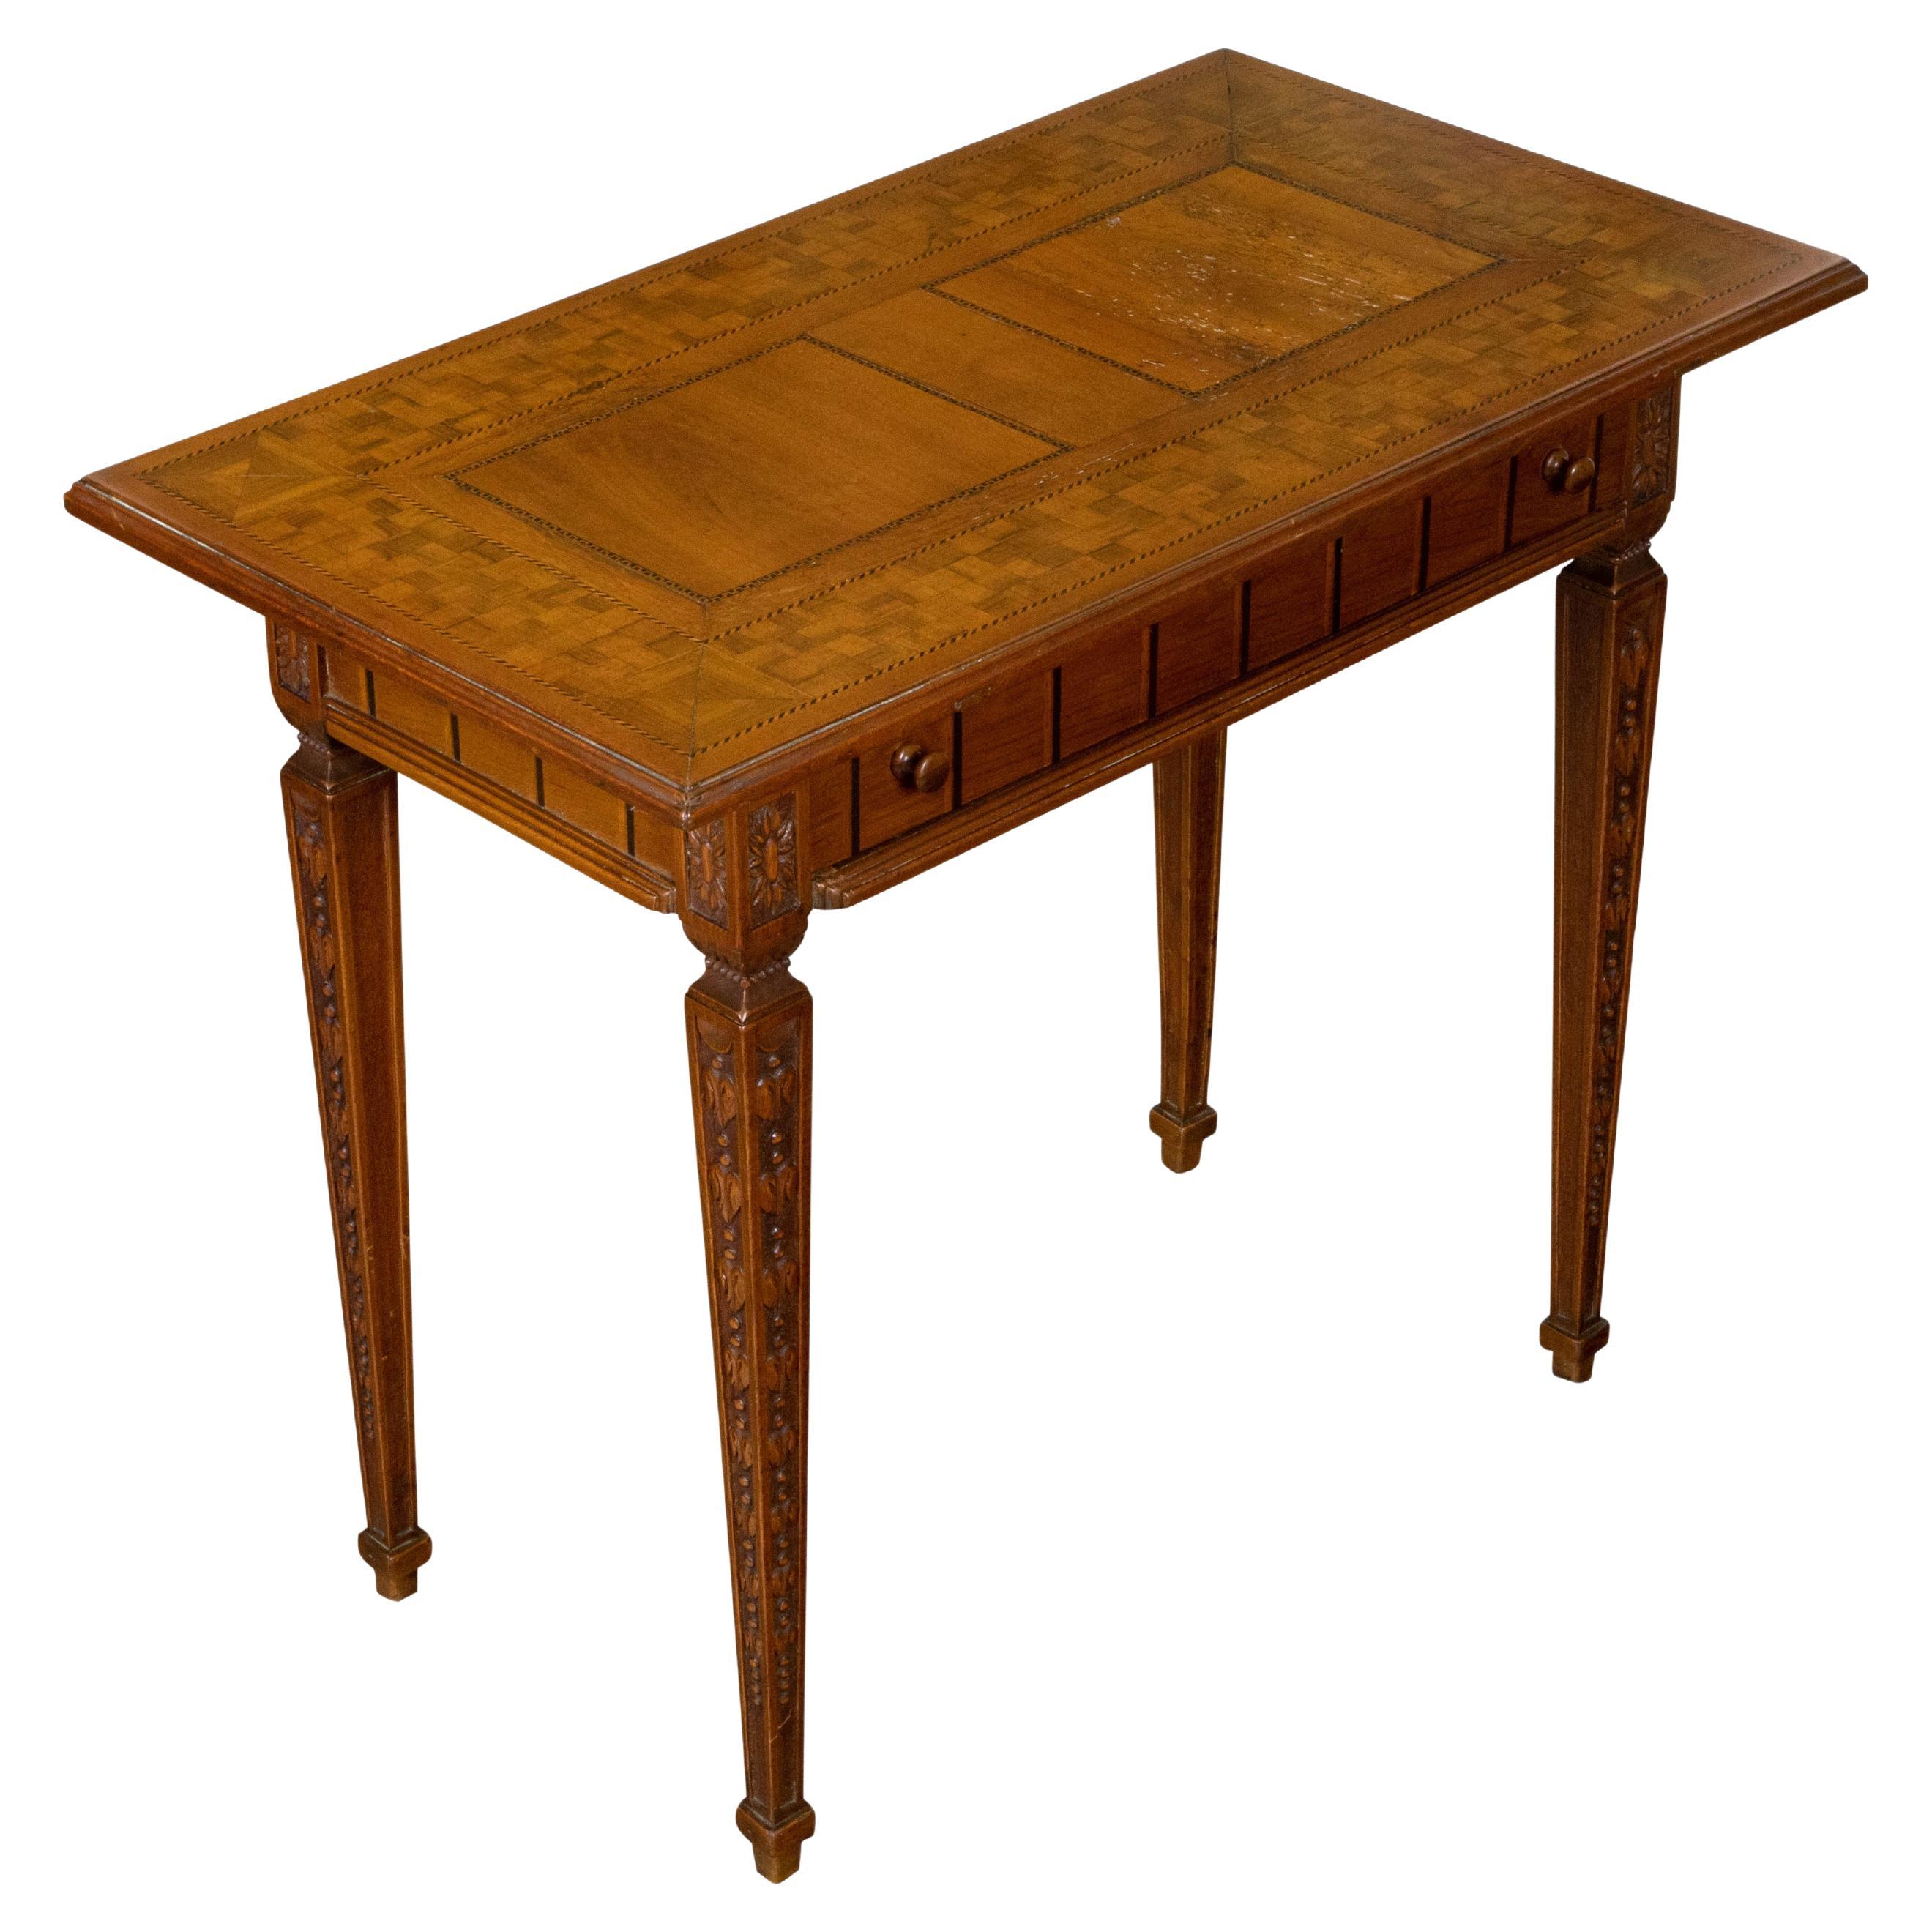 French Napoléon III Period Walnut Side Table with Inlaid Décor and Single Drawer